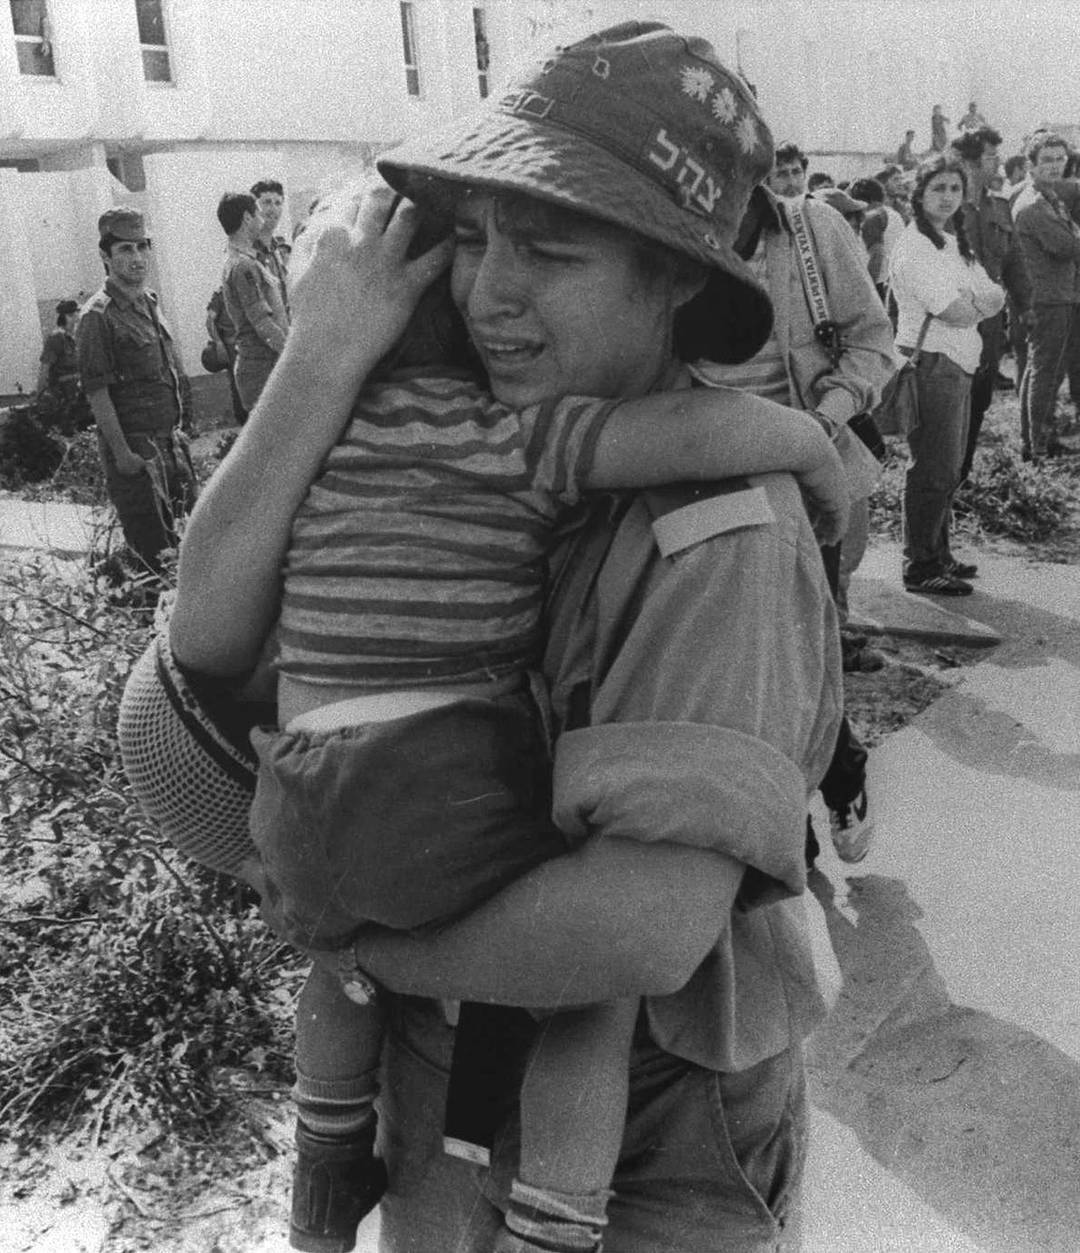 An Israeli woman soldier cries as she evacuates a Jewish settler child from an apartment building in the Sinai Desert settlement of Yamit, as part of Israel's peace treaty with Egypt, 1982